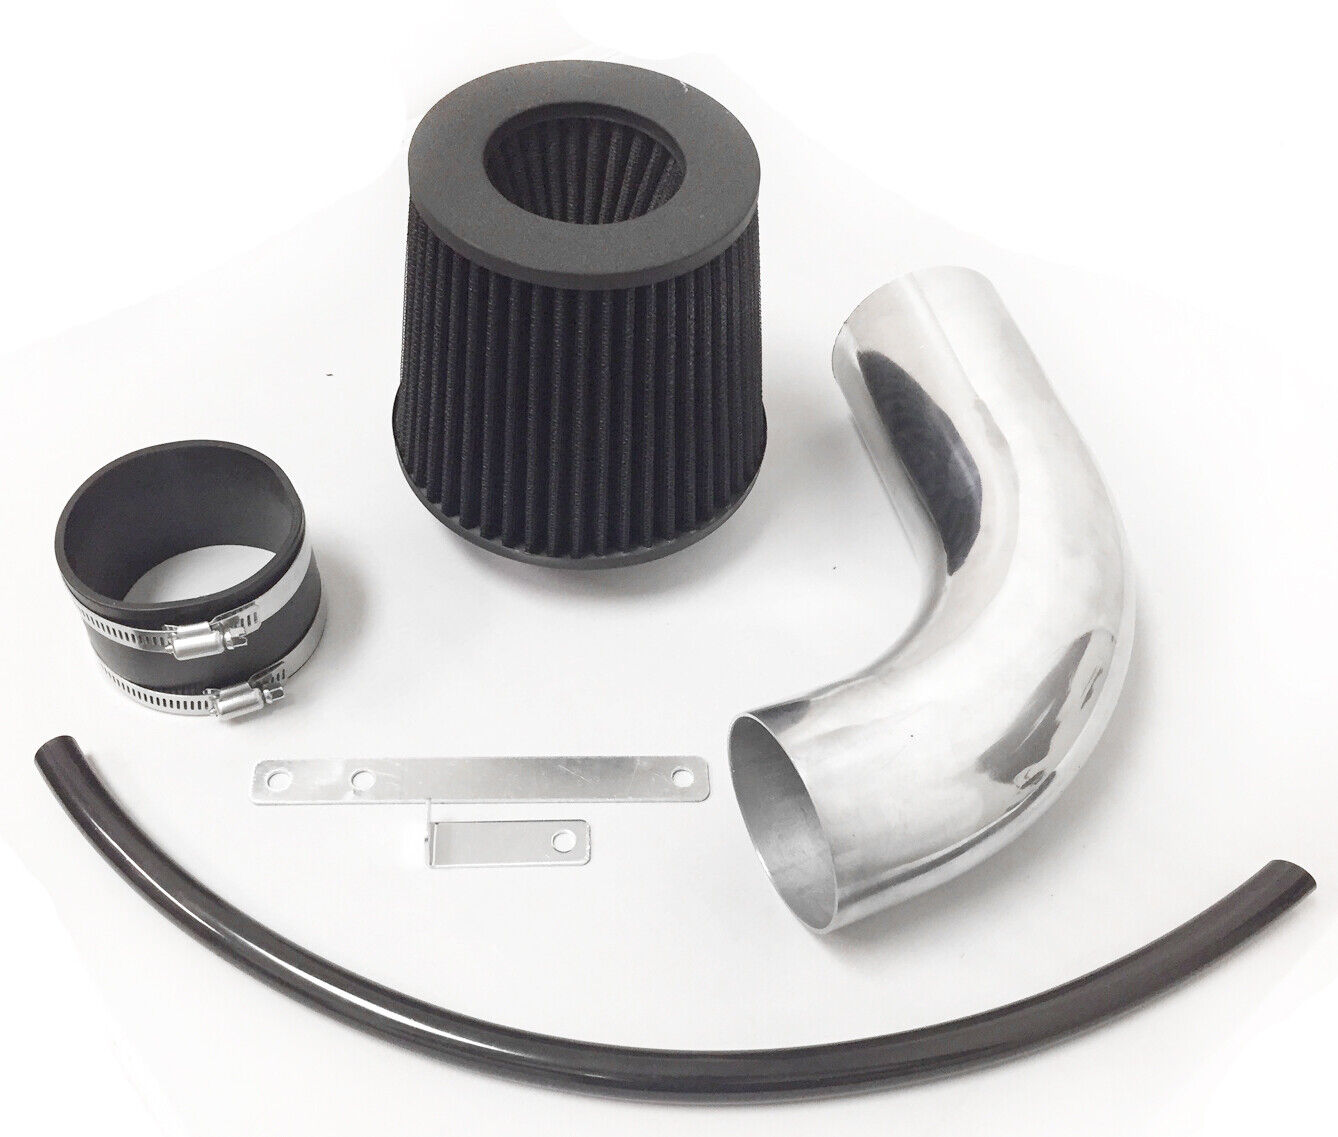 All Black For 1992-1999 Toyota Paseo 1.5L L4 Air Intake System Kit + Filter